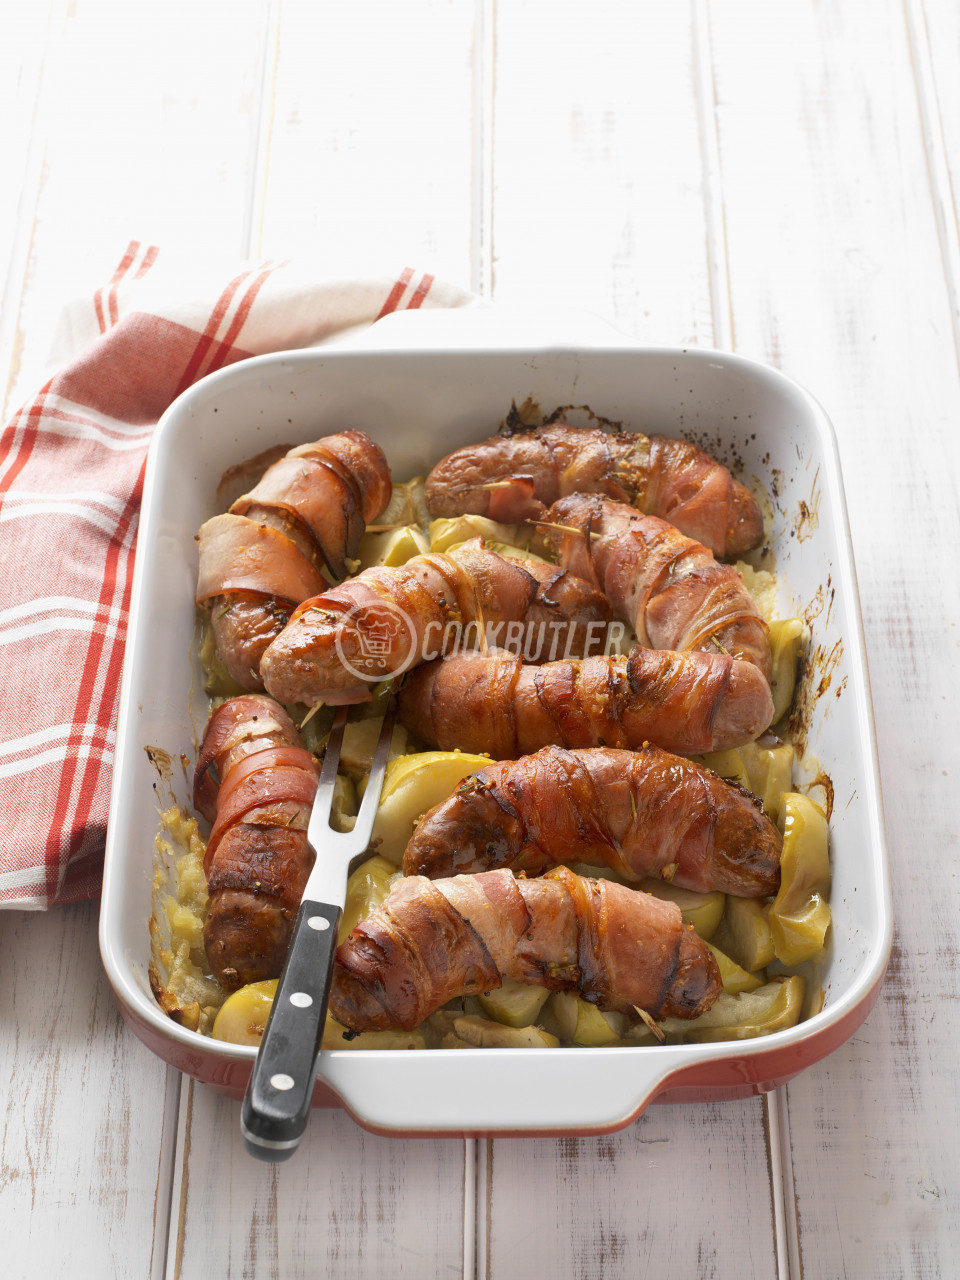 Bacon-wrapped sausages on apples | preview